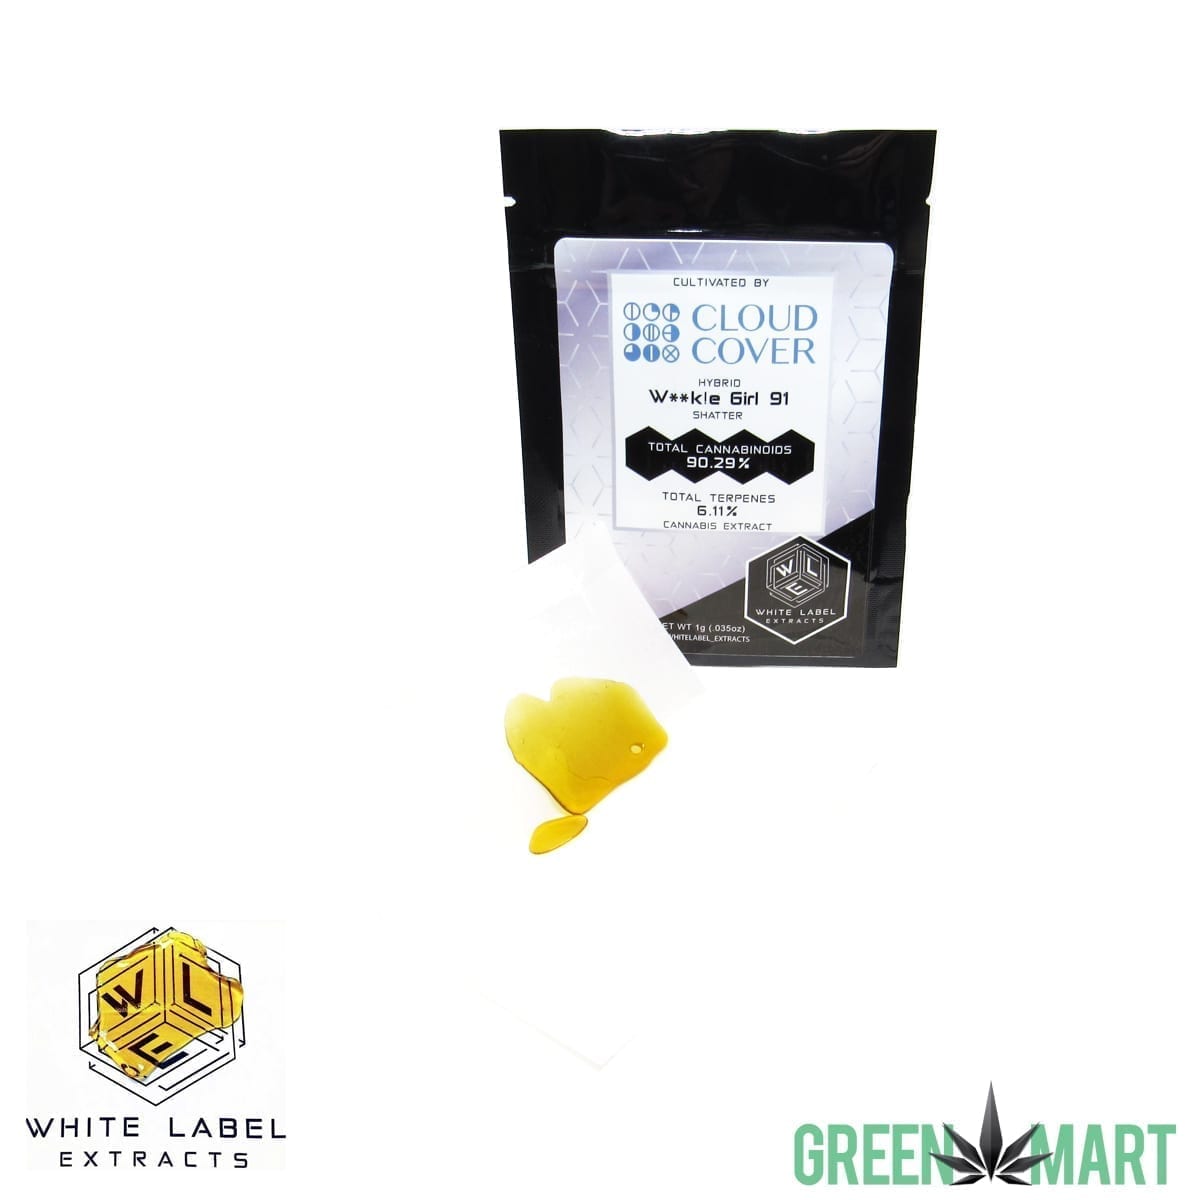 White Label Extracts - W**kie Girl 91